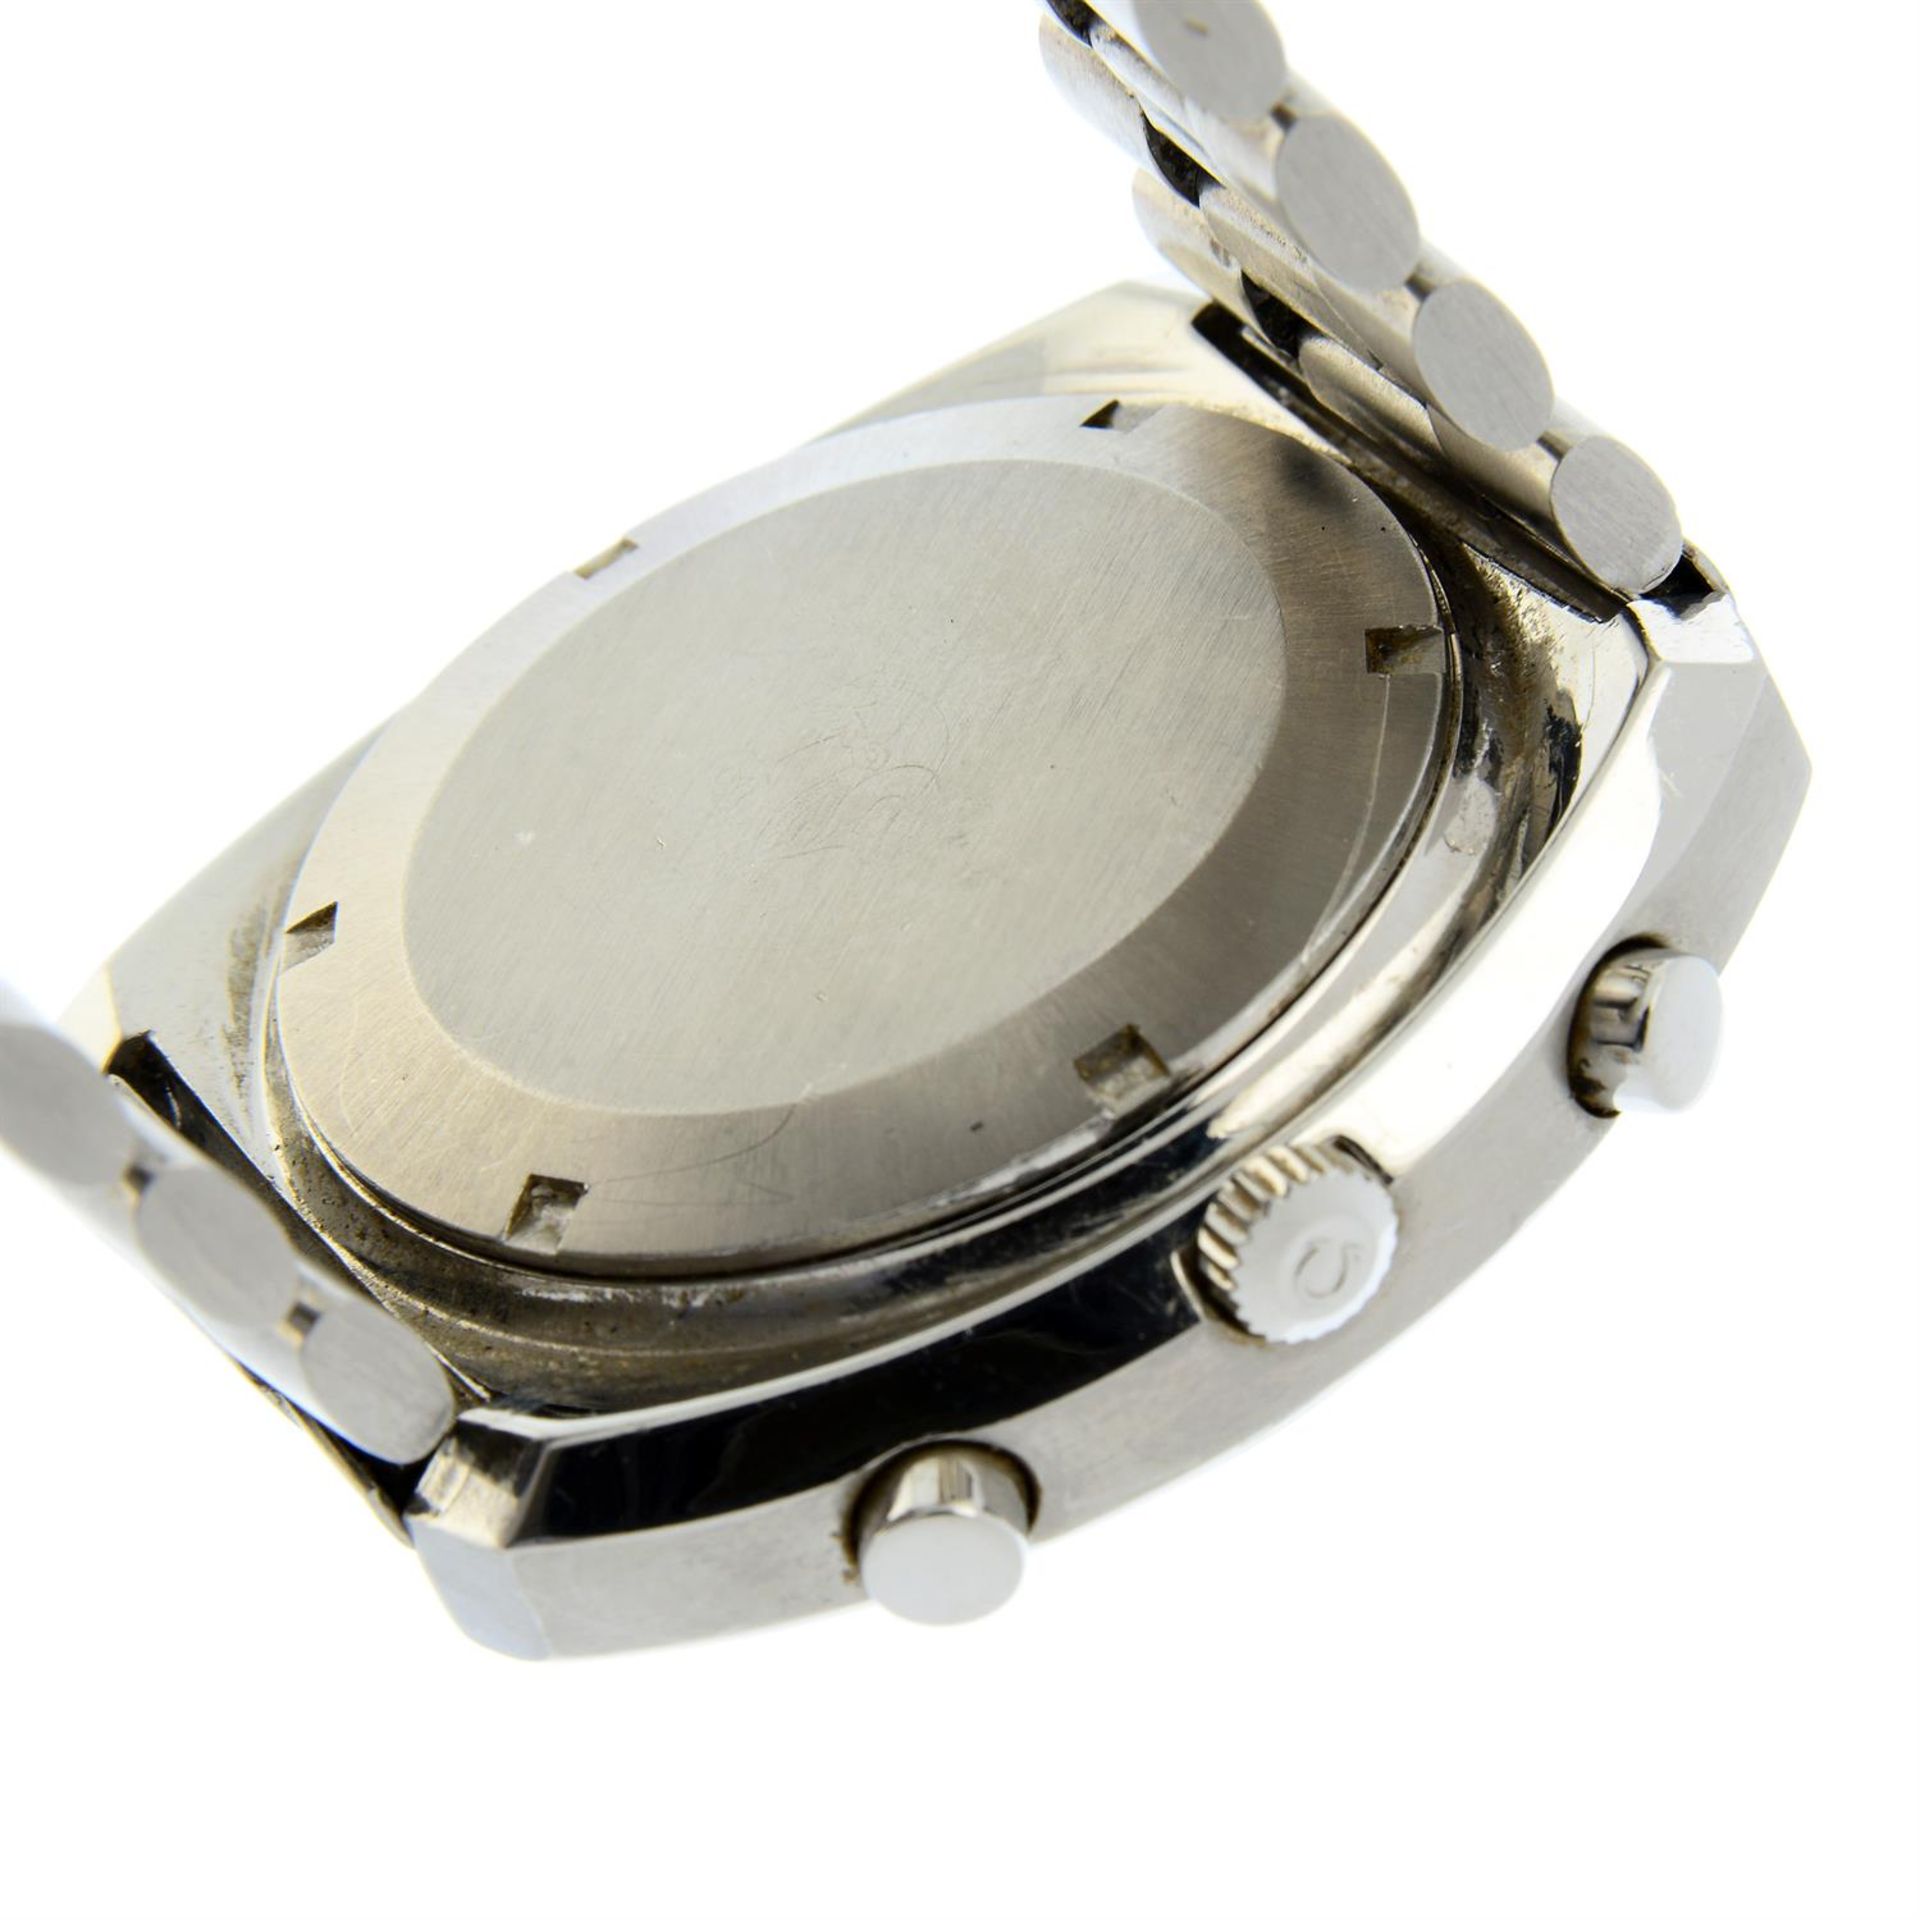 OMEGA - a stainless steel Speedsonic chronograph bracelet watch, 43mm. - Image 5 of 7